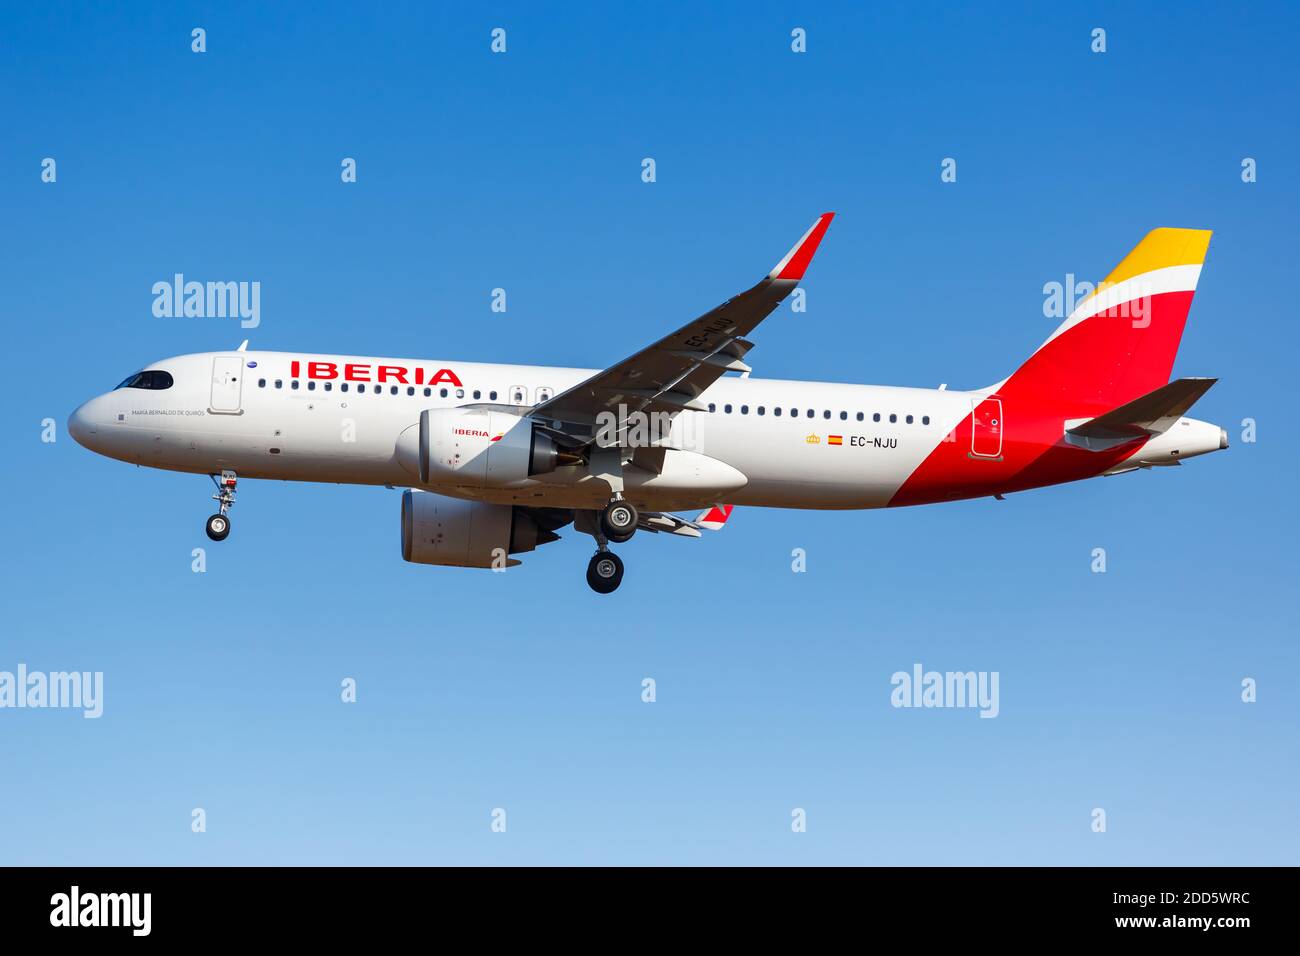 Athens, Greece - September 21, 2020: Iberia Airbus A320neo airplane Athens Airport in Greece. Airbus is a European aircraft manufacturer based in Toul Stock Photo